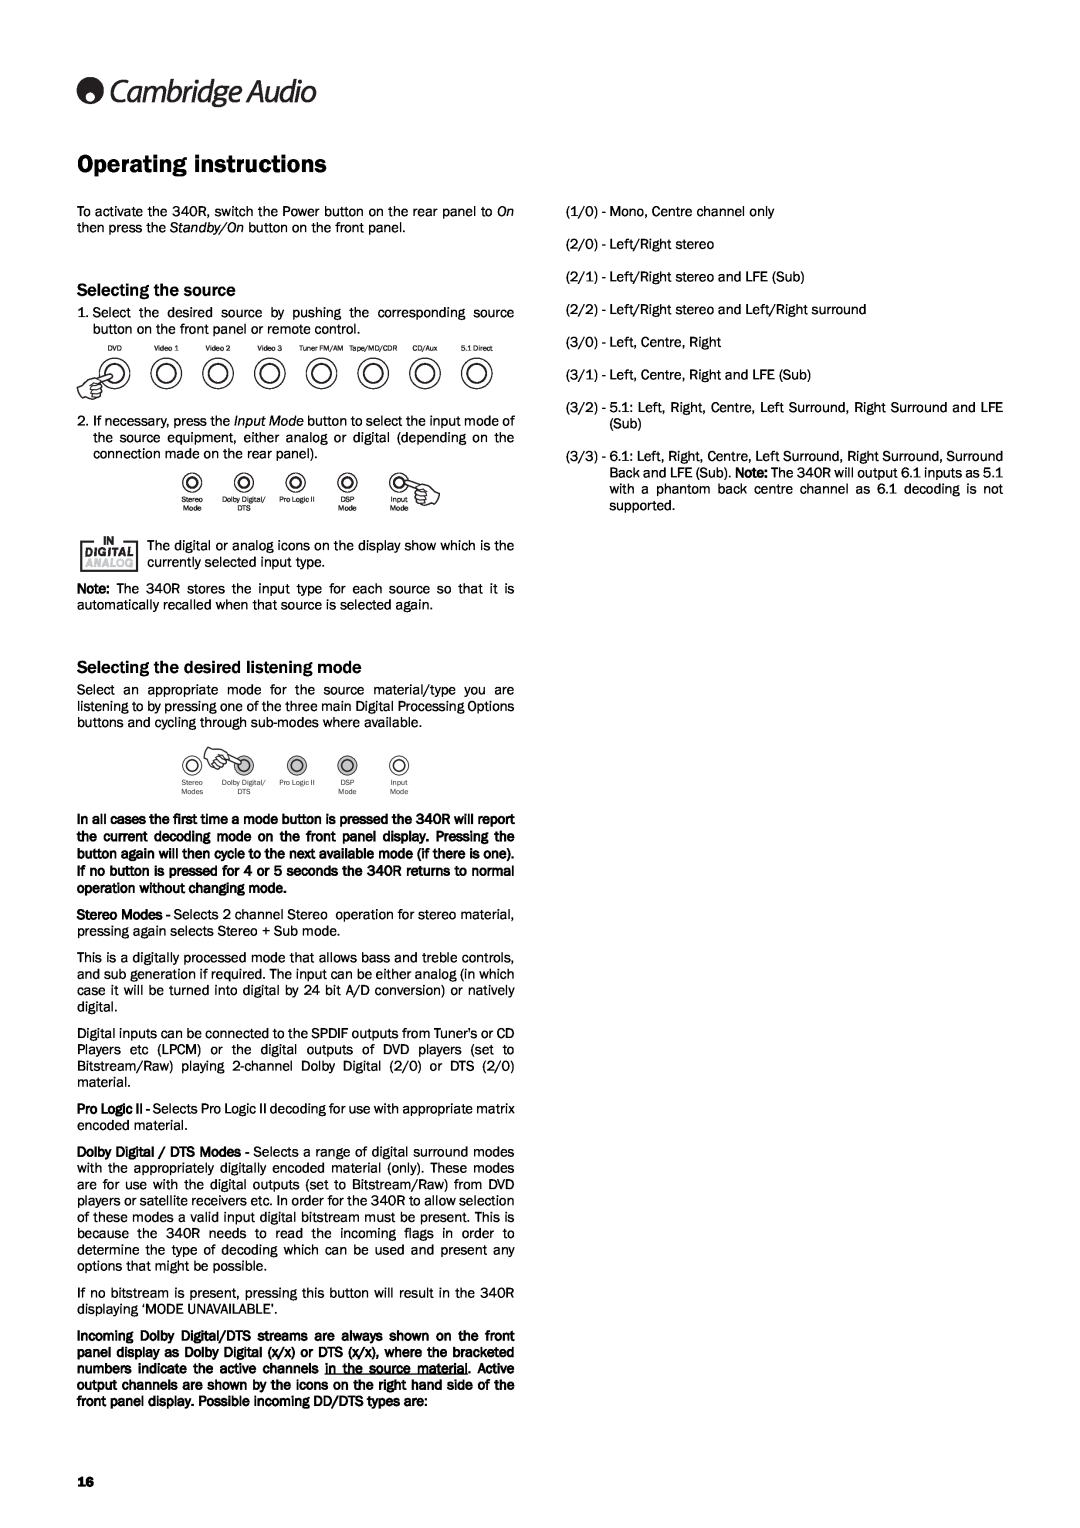 Cambridge Audio 340Razur user manual Operating instructions, Selecting the source, Selecting the desired listening mode 